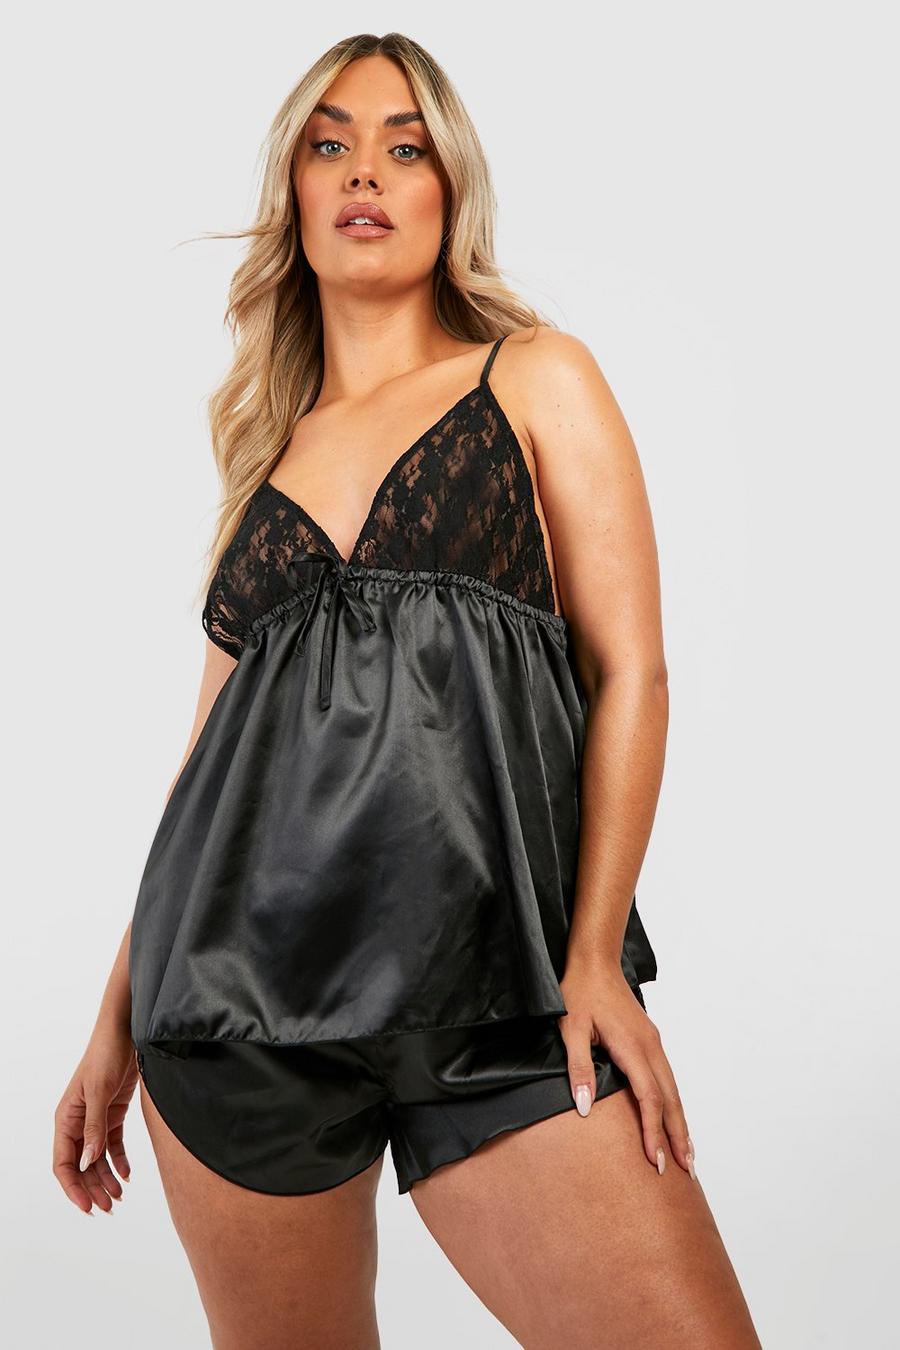 Black Plus Satin and Lace Teddy Top and Shorts Pyjama Set